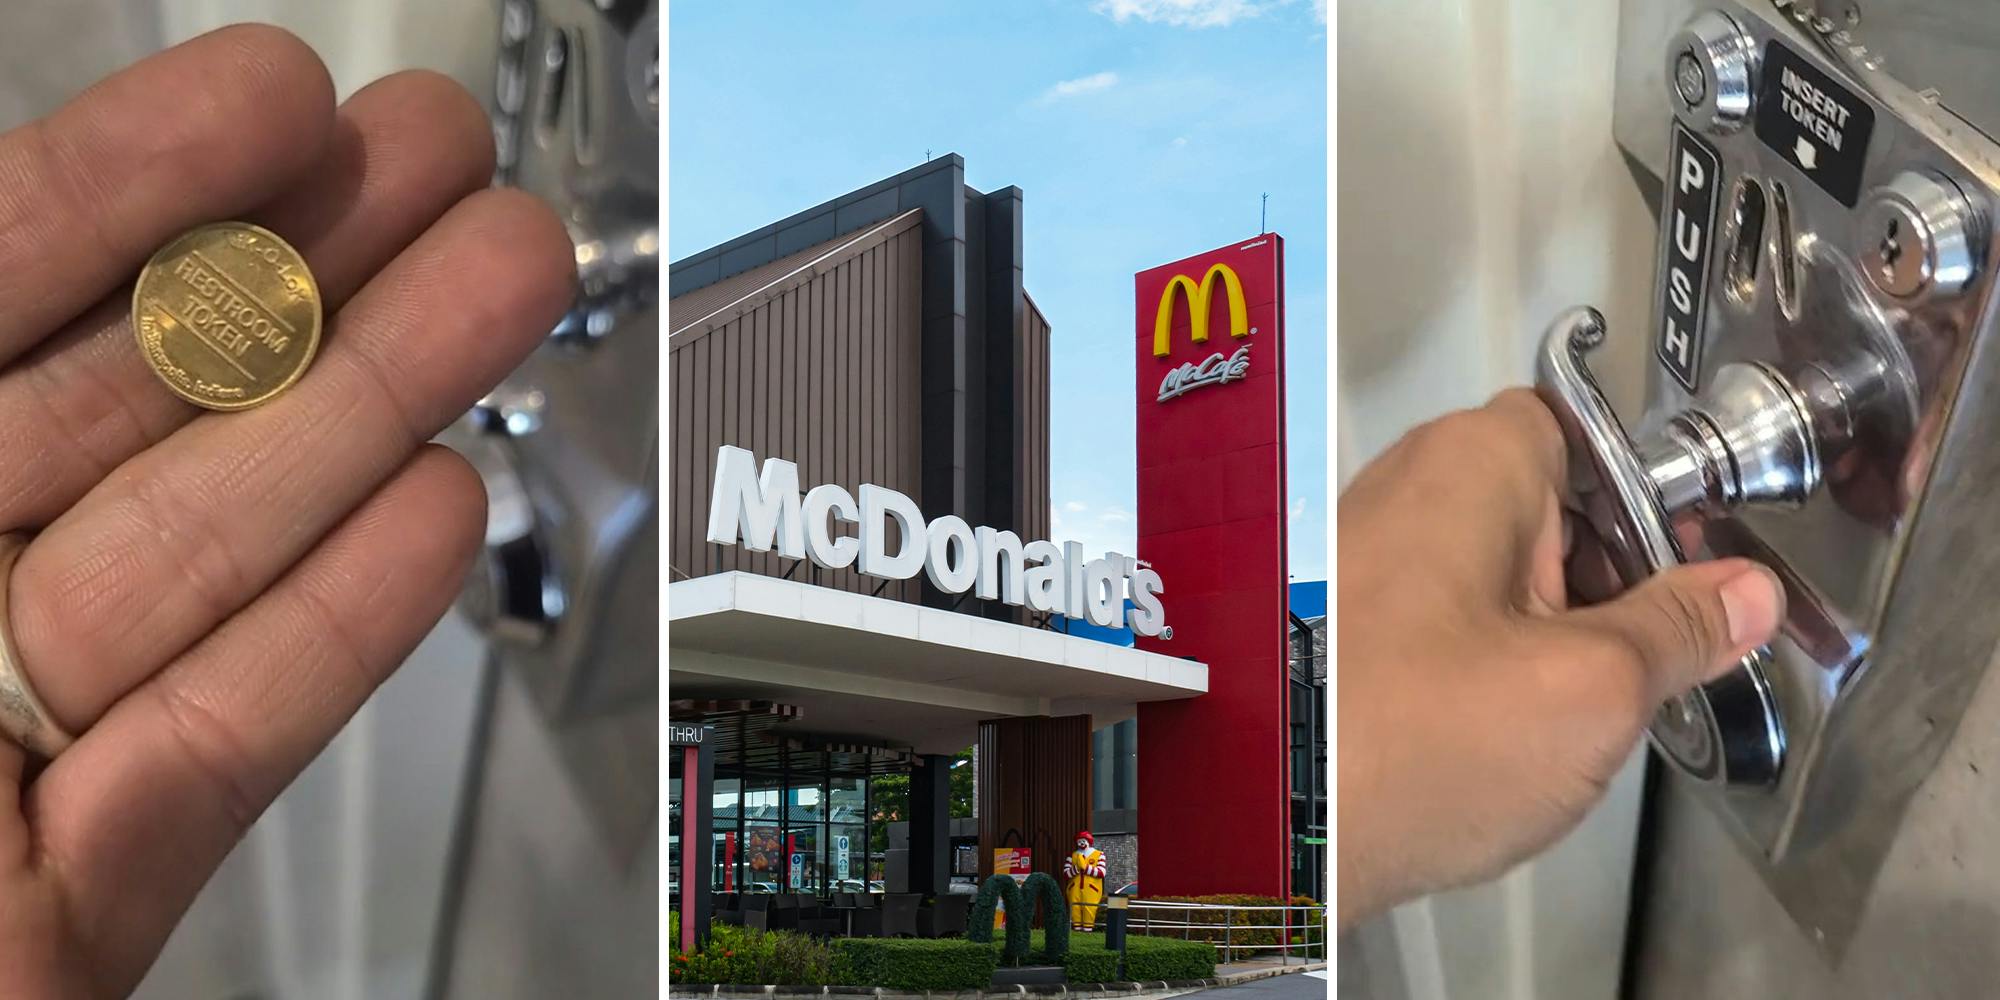 Customer tries using the bathroom at McDonald's. She can't believe what she needs to get in